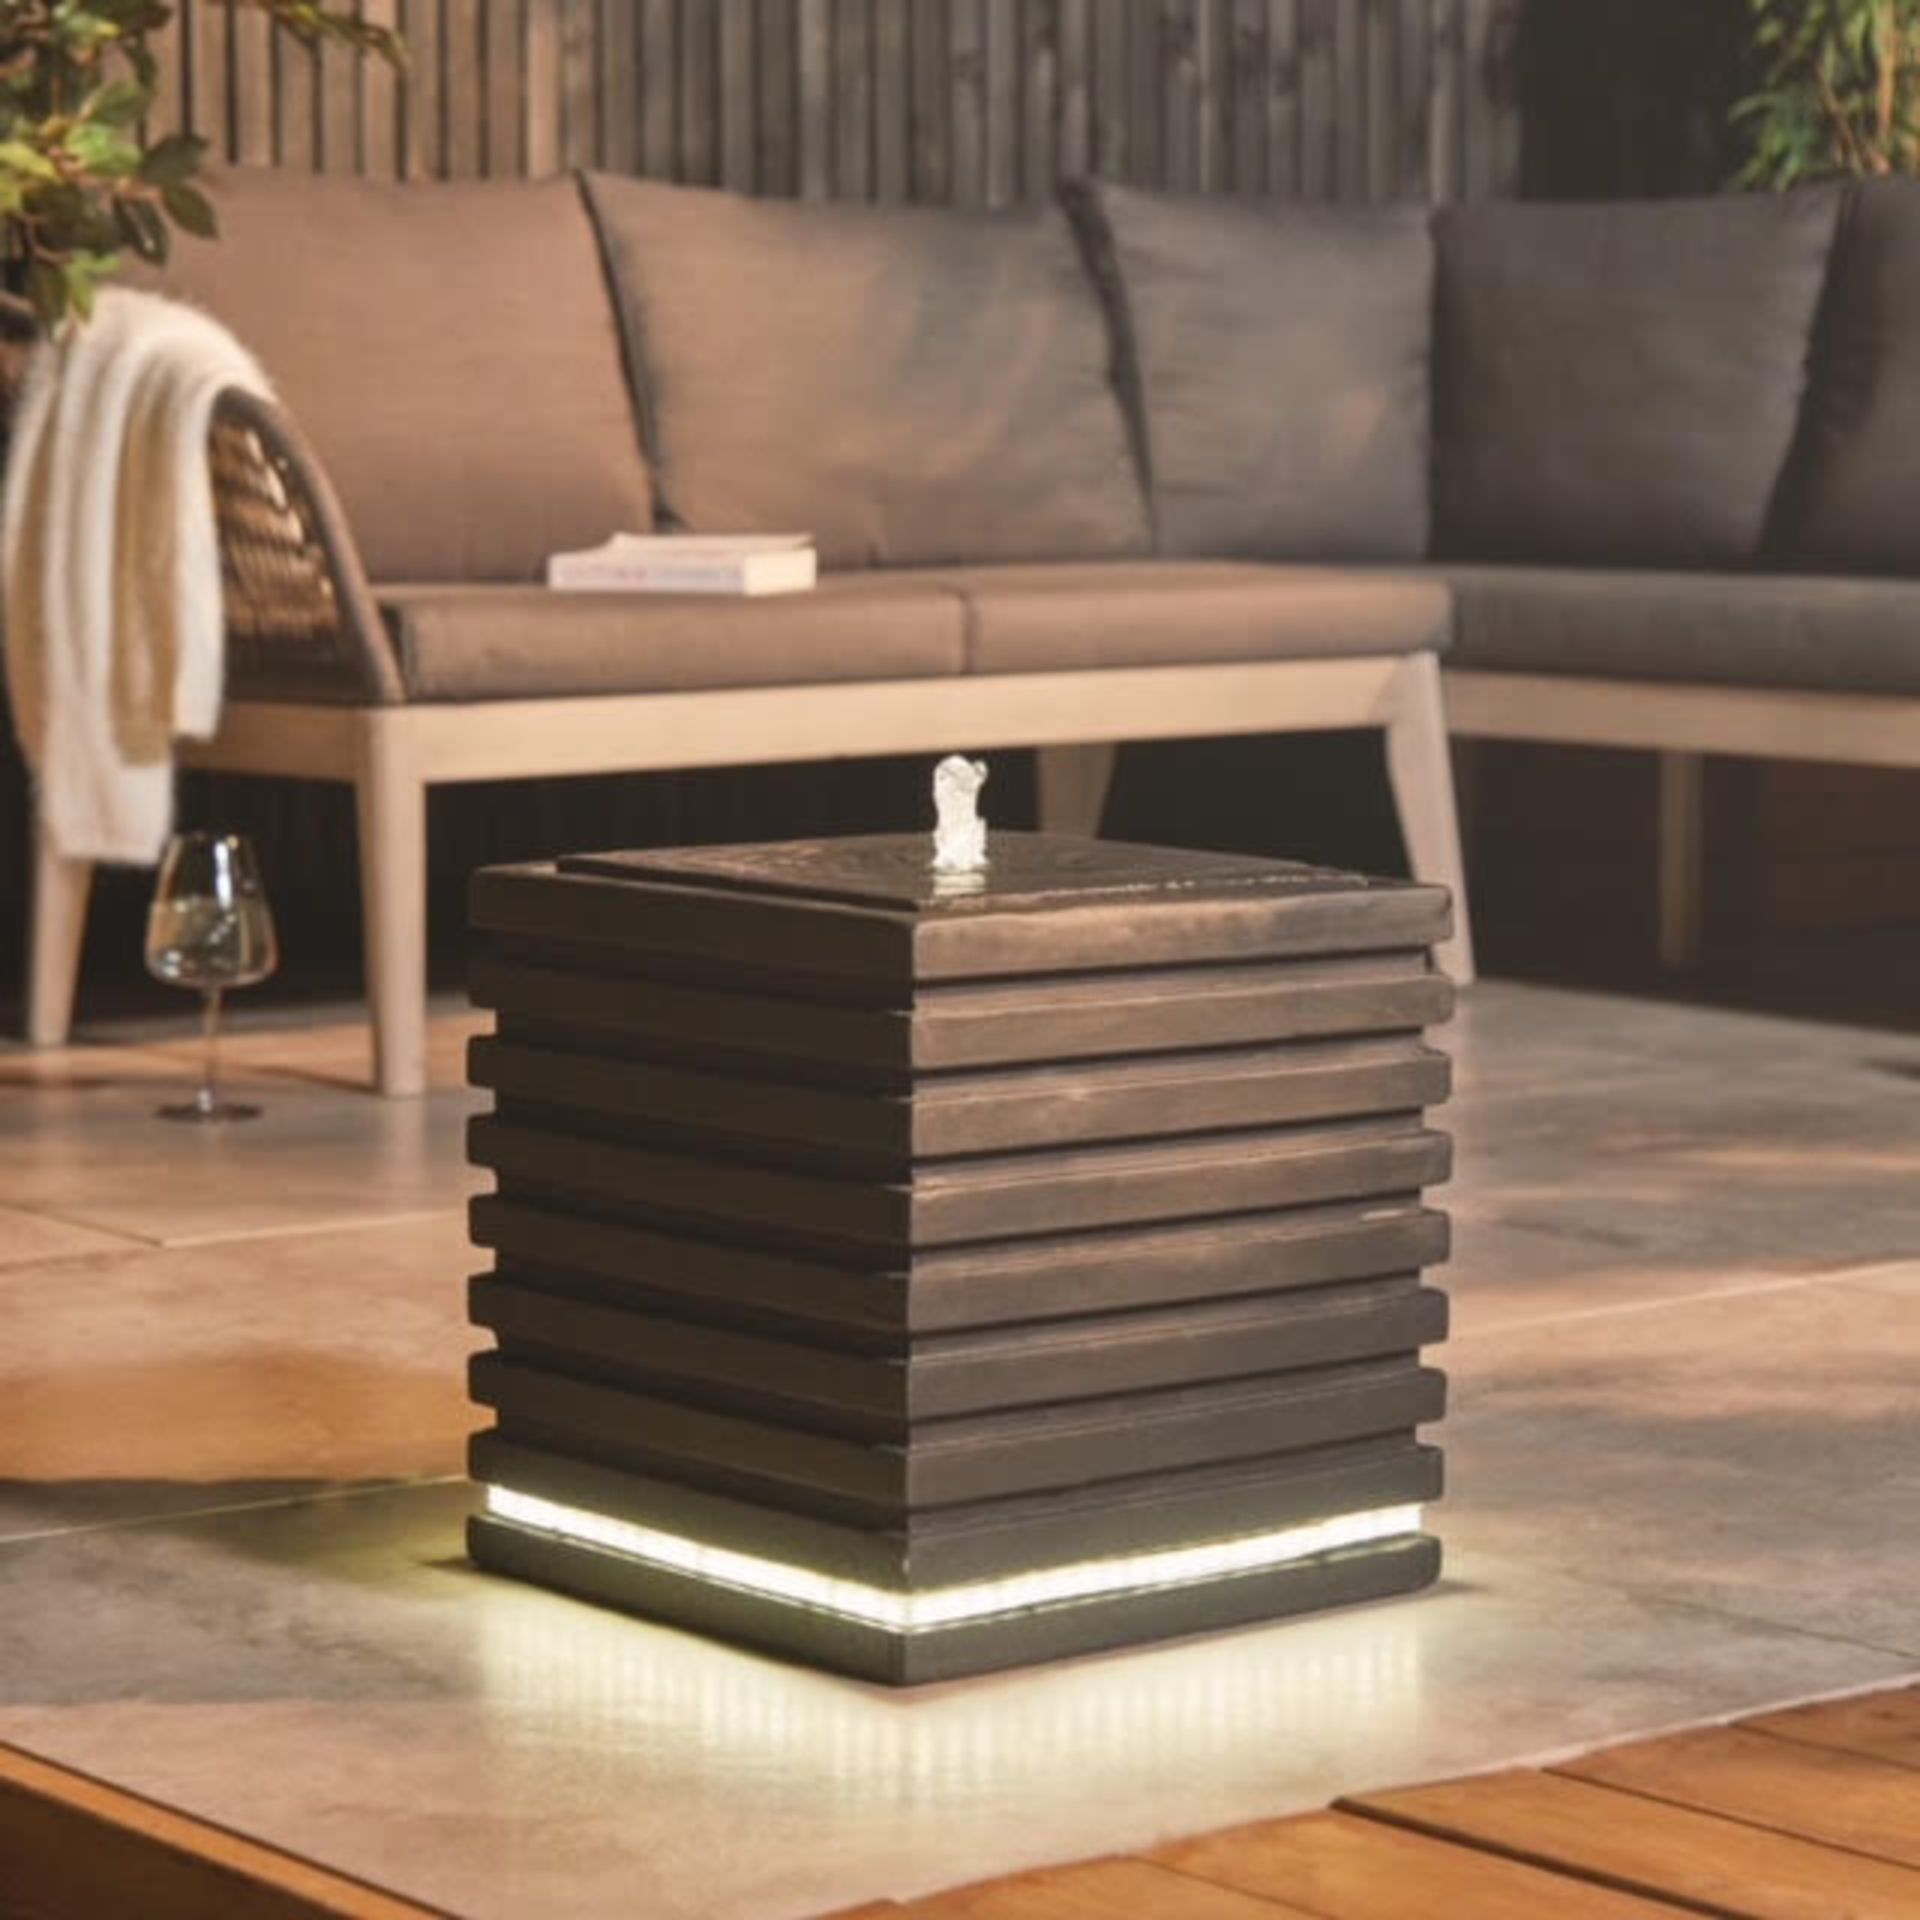 PALLET TO CONTAIN 12 x New & Boxed LED Ribbed Cube Water Feature. RRP £299.99 EACH. (REF723)